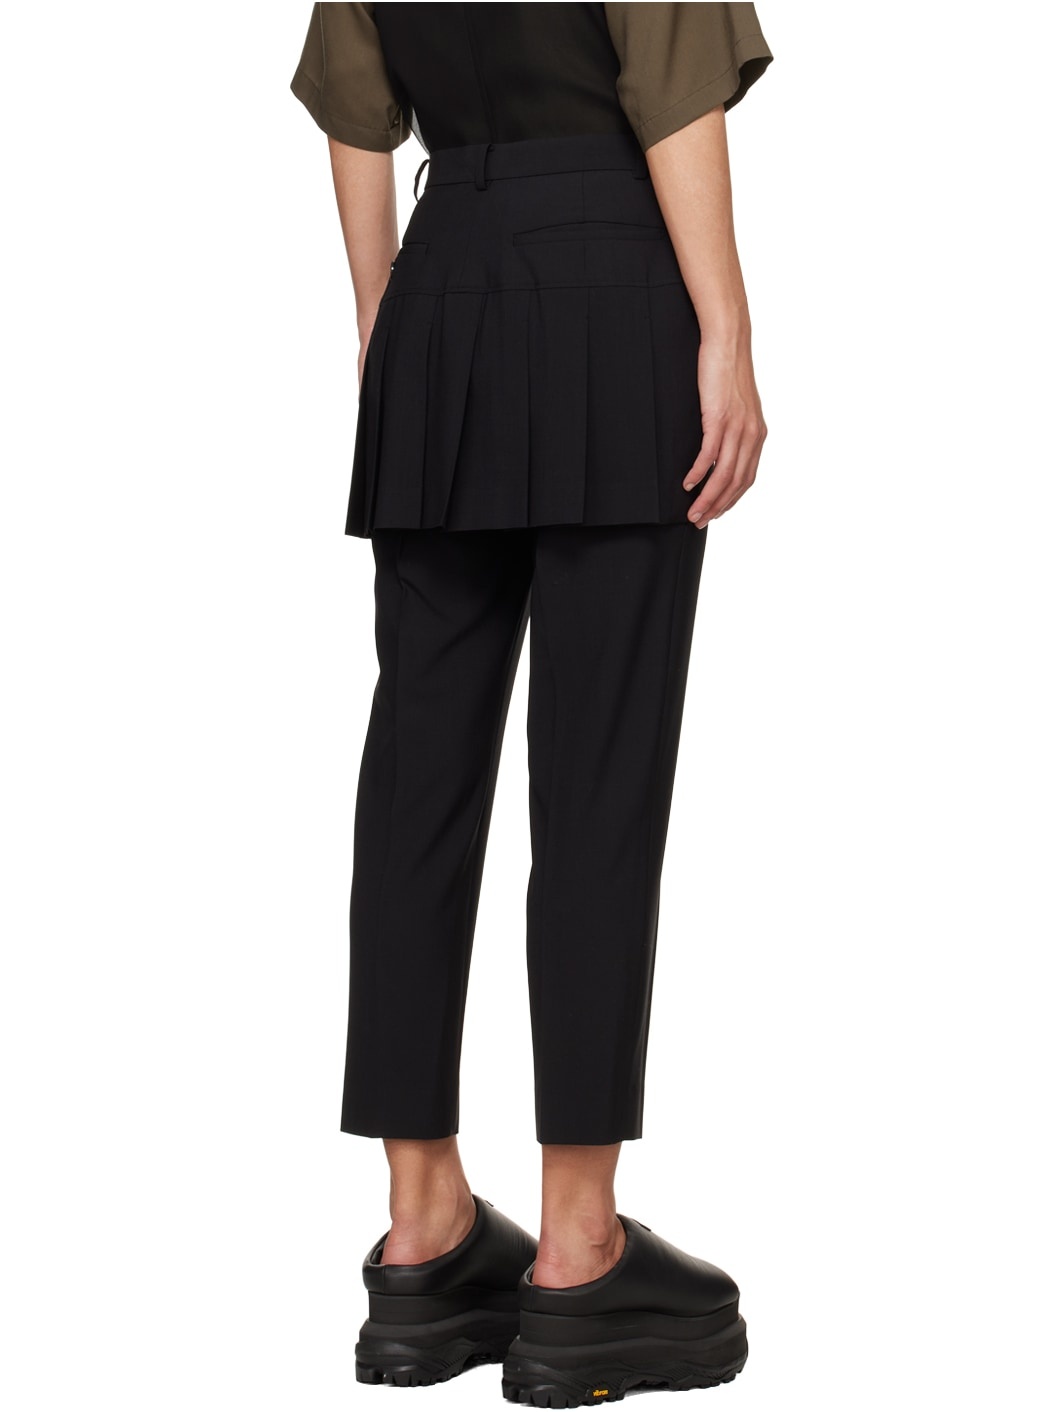 Black Layered Trousers - 3